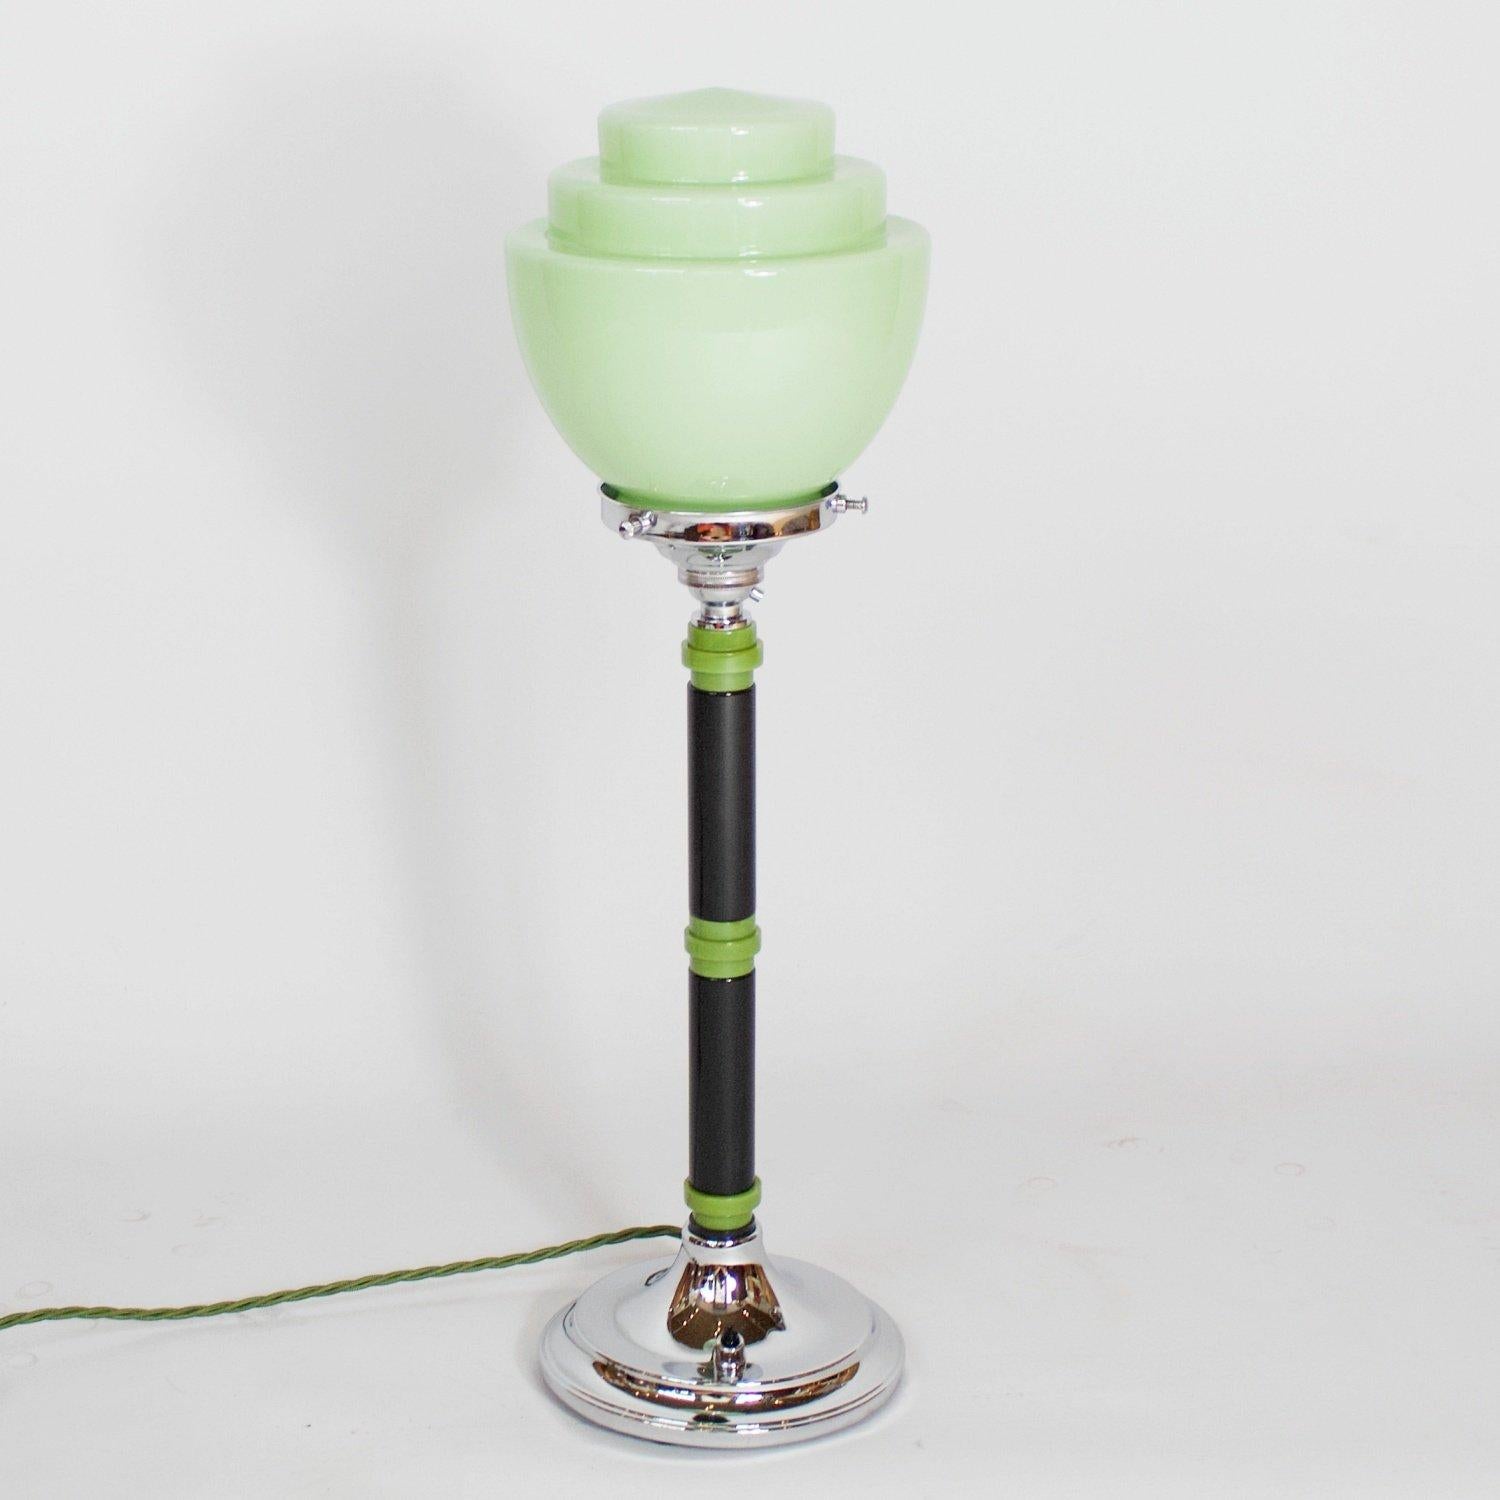 A chromed metal, bakelite and glass Art Deco table lamp. Two toned green bakelite stem with a chromed metal base and green glass stepped shade. 

Dimensions: H 50cm D of shade 15cm D of base 13cm

Origin: English

Item number: 1706205

All